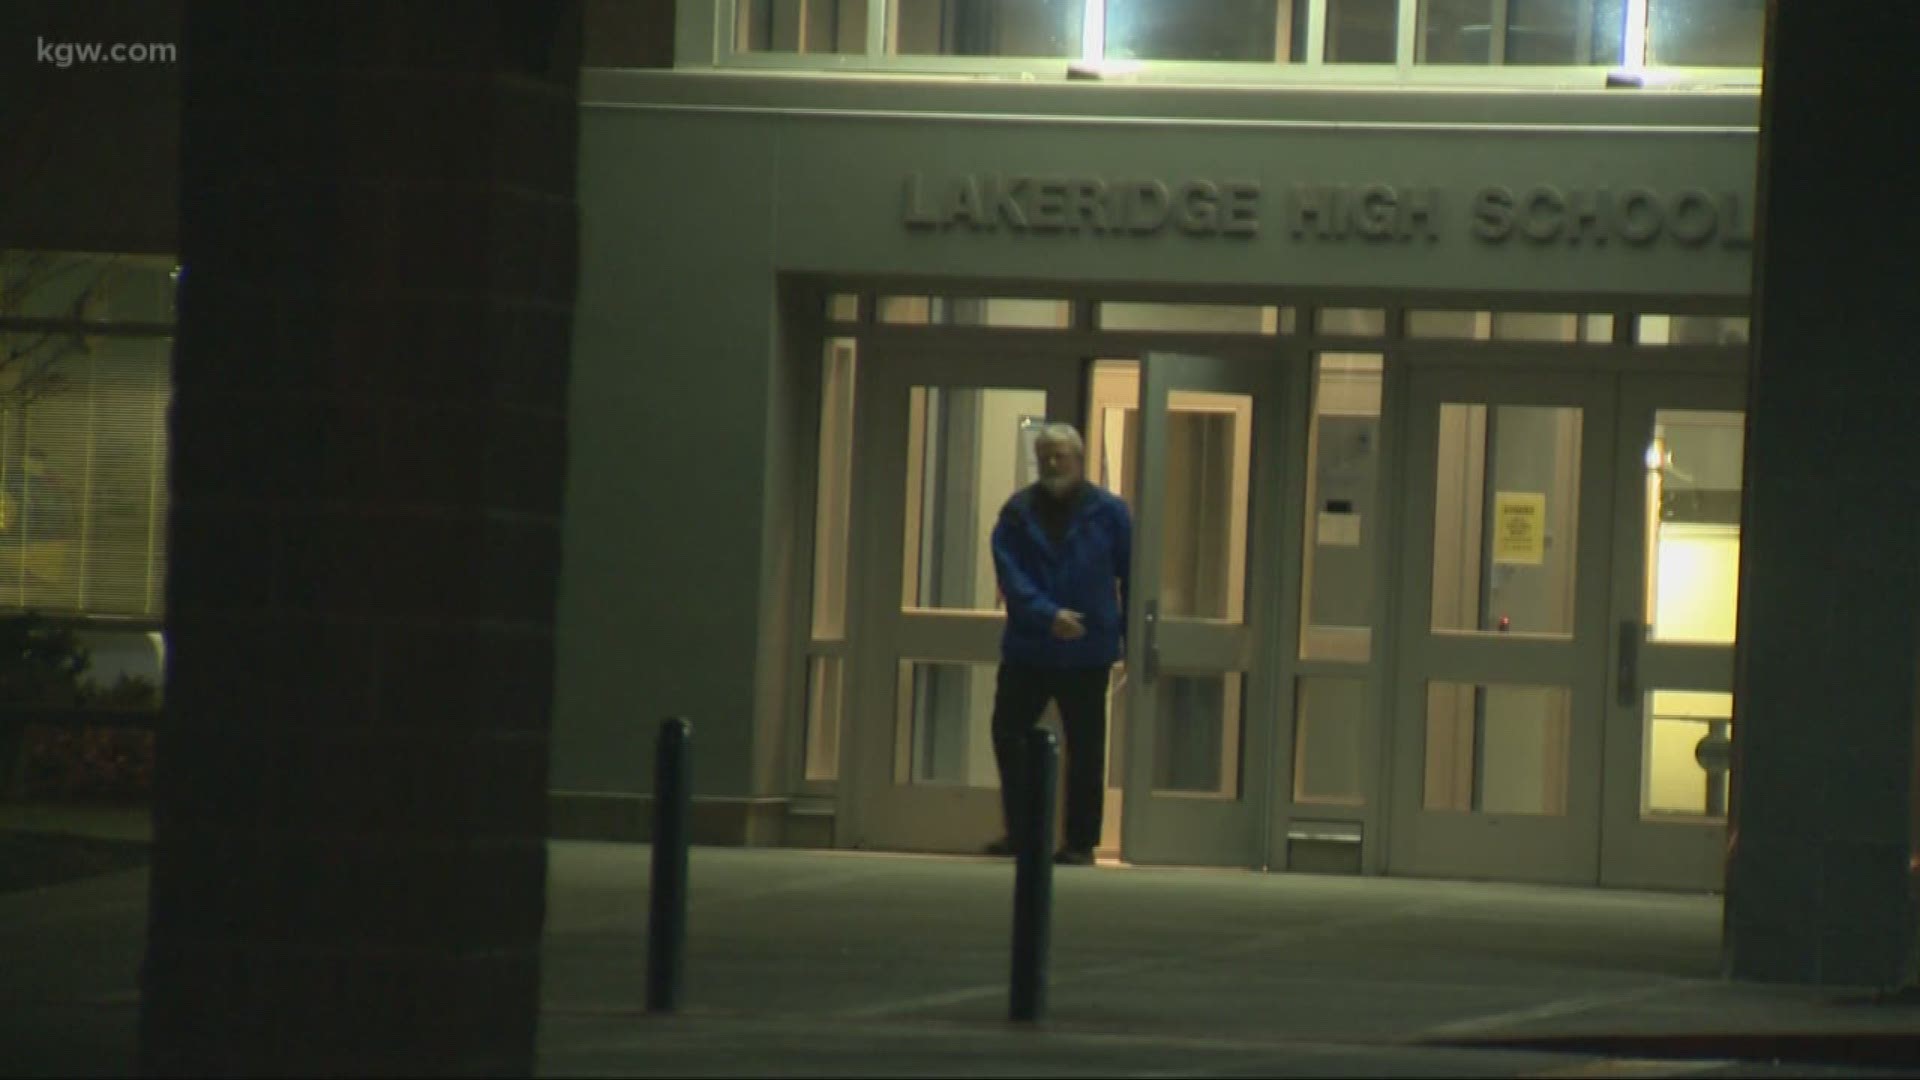 A gun in a student’s car and the threat of a former student coming to campus to fight current students prompted a lockout at Lakeridge High School on Thursday afternoon.